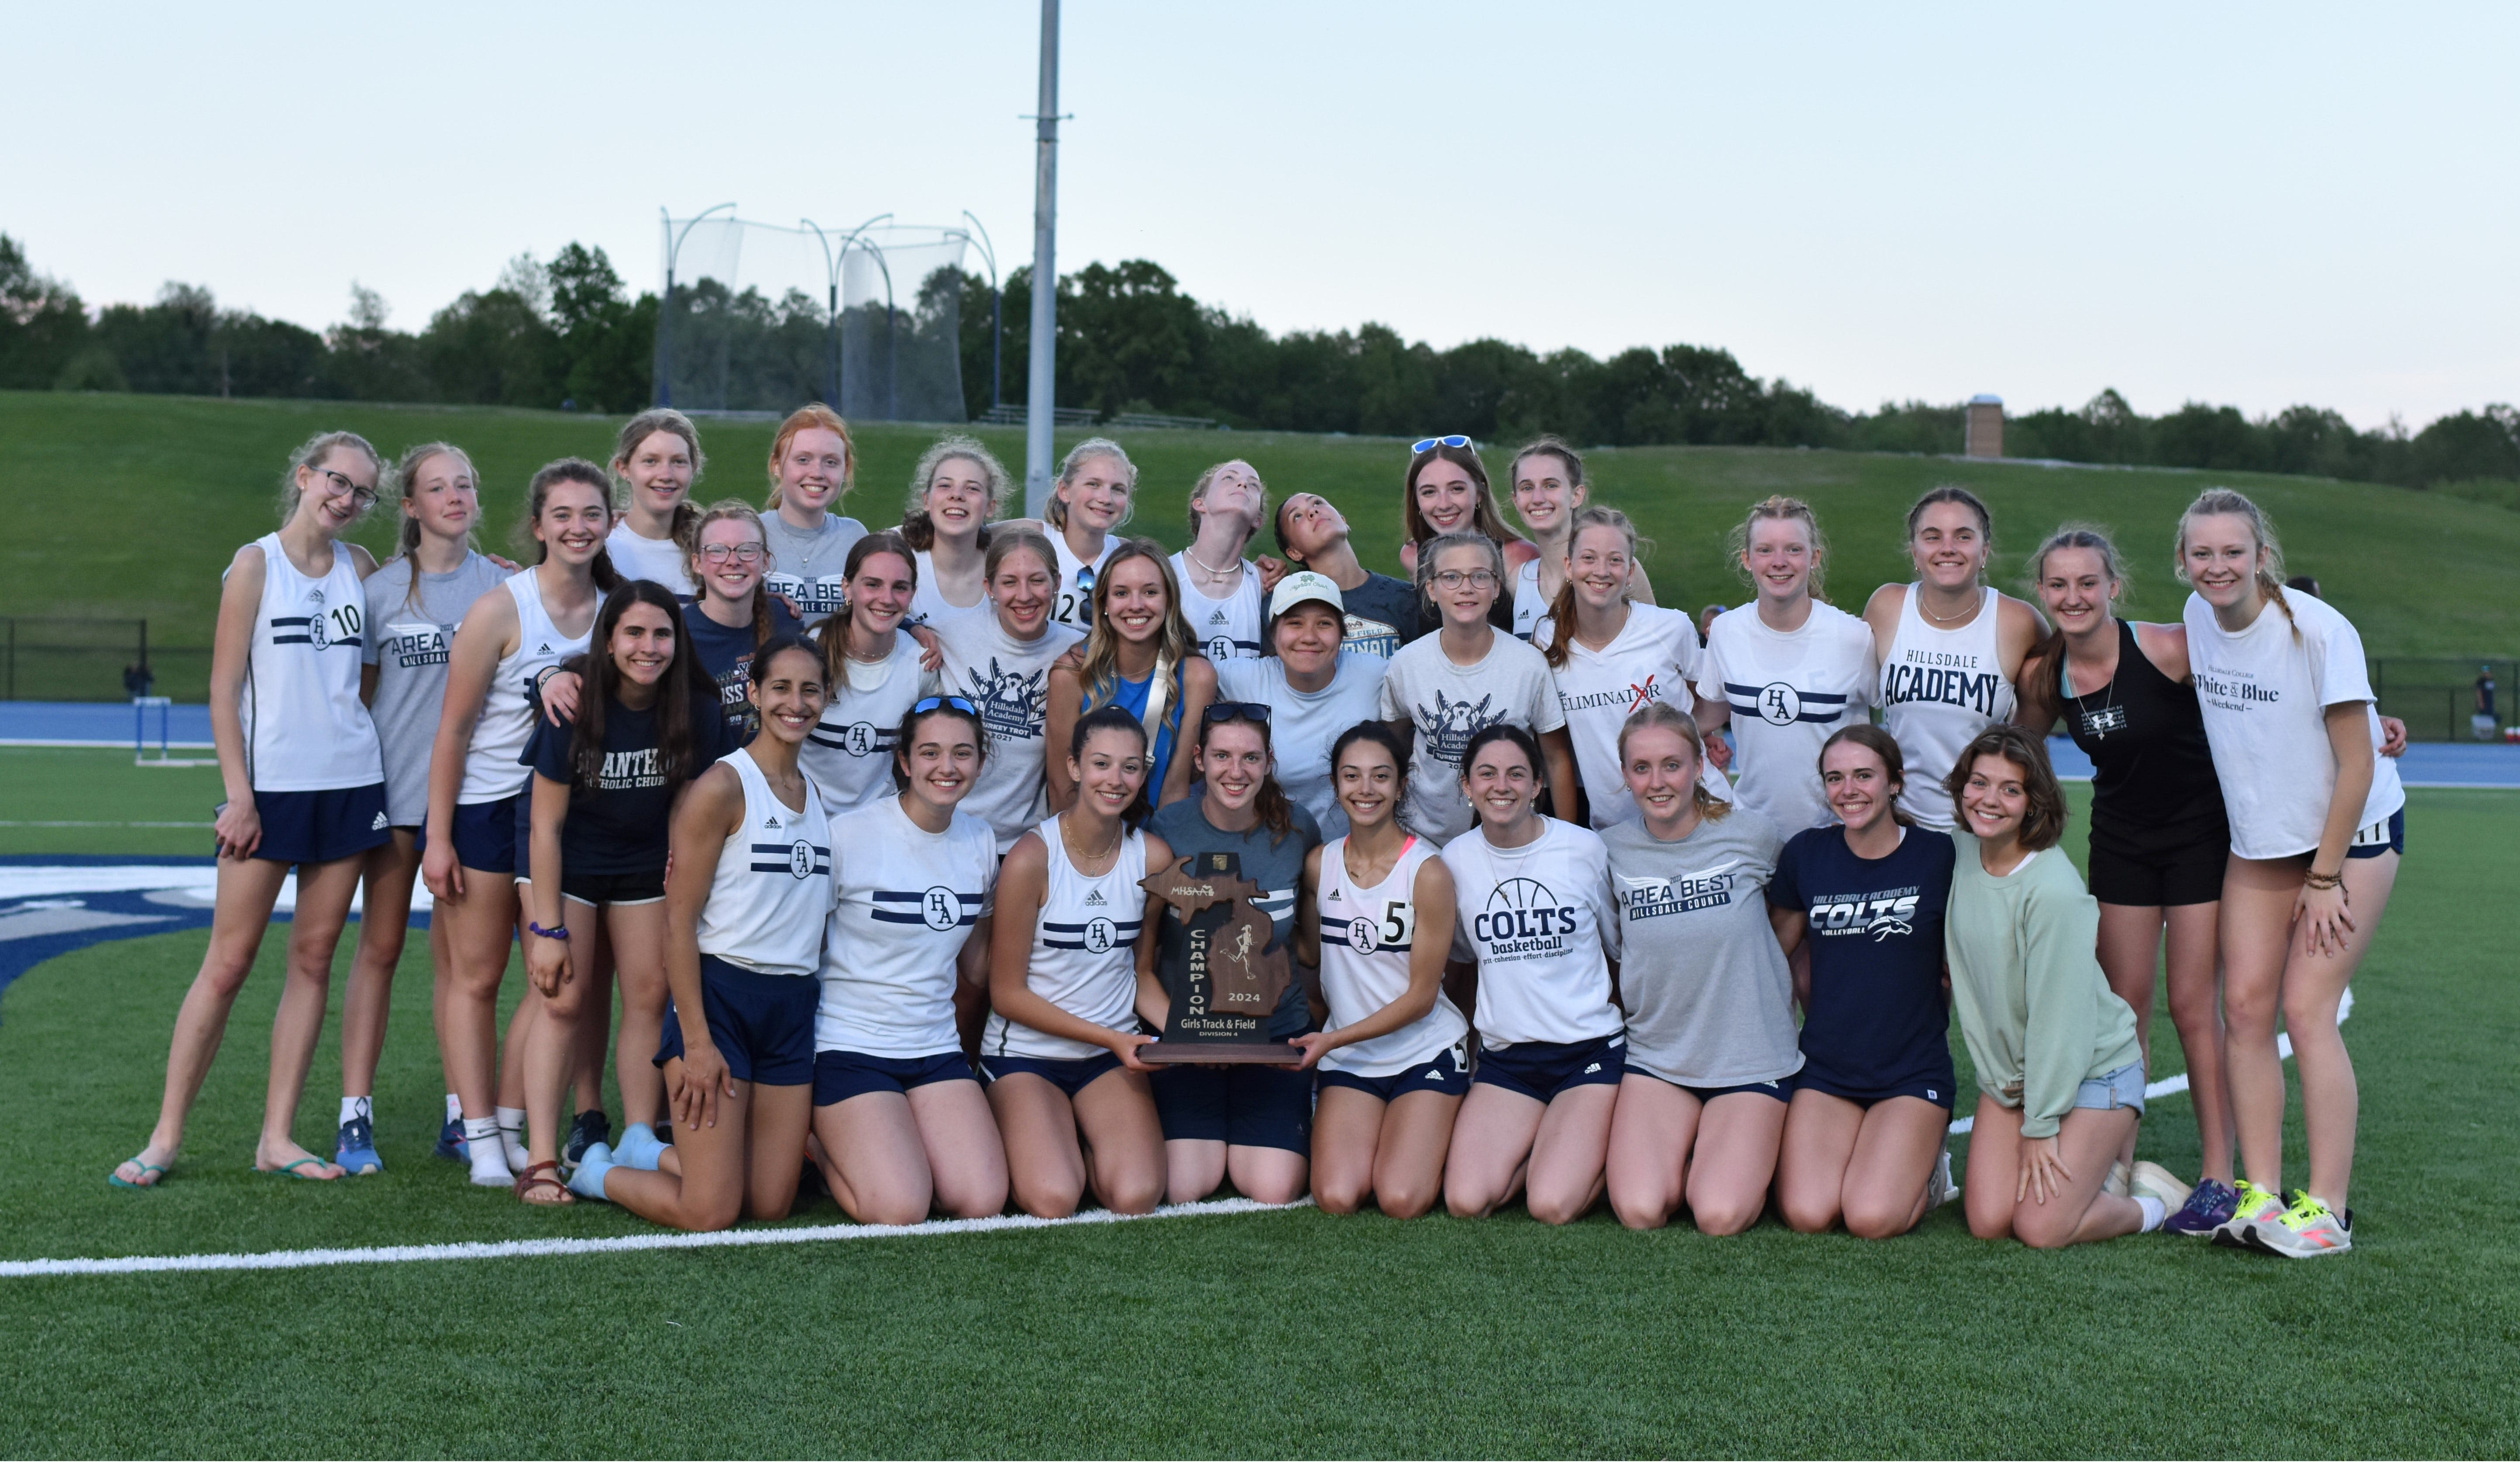 Hillsdale Academy girls track team wins MITCA D4 team state; Colts boys place second